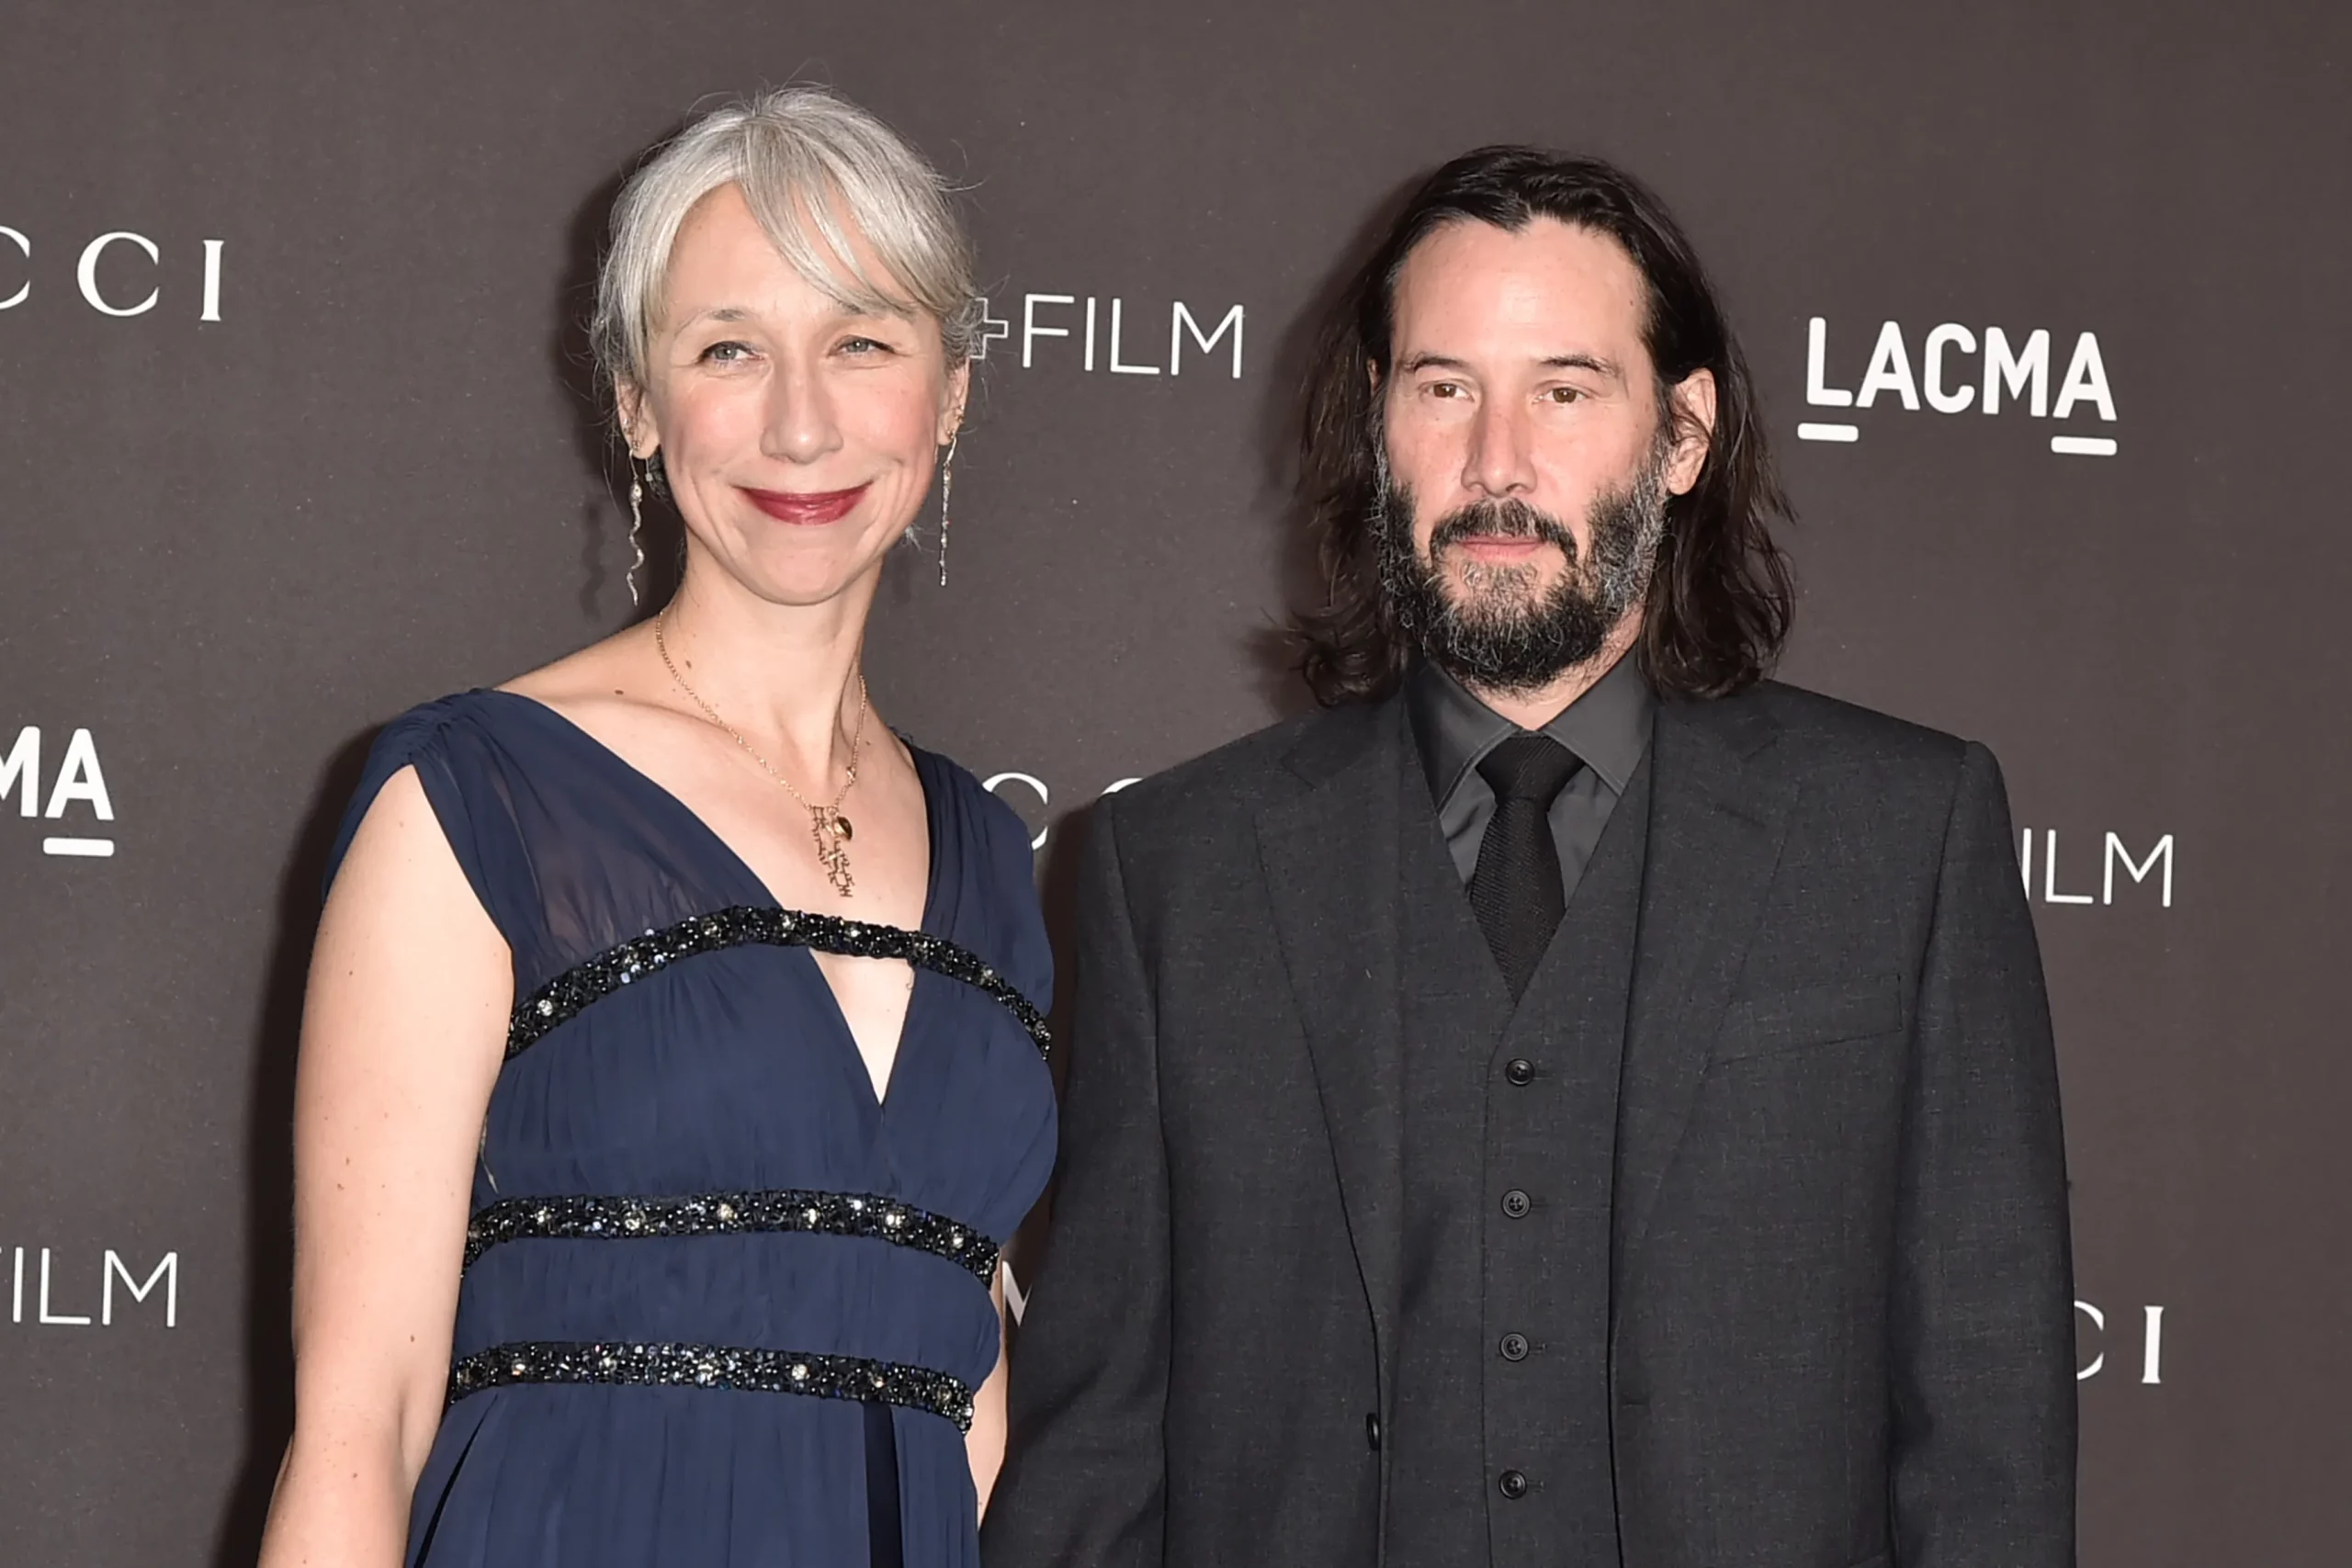 Keanu Reeves along with his partner Alexandra Grant